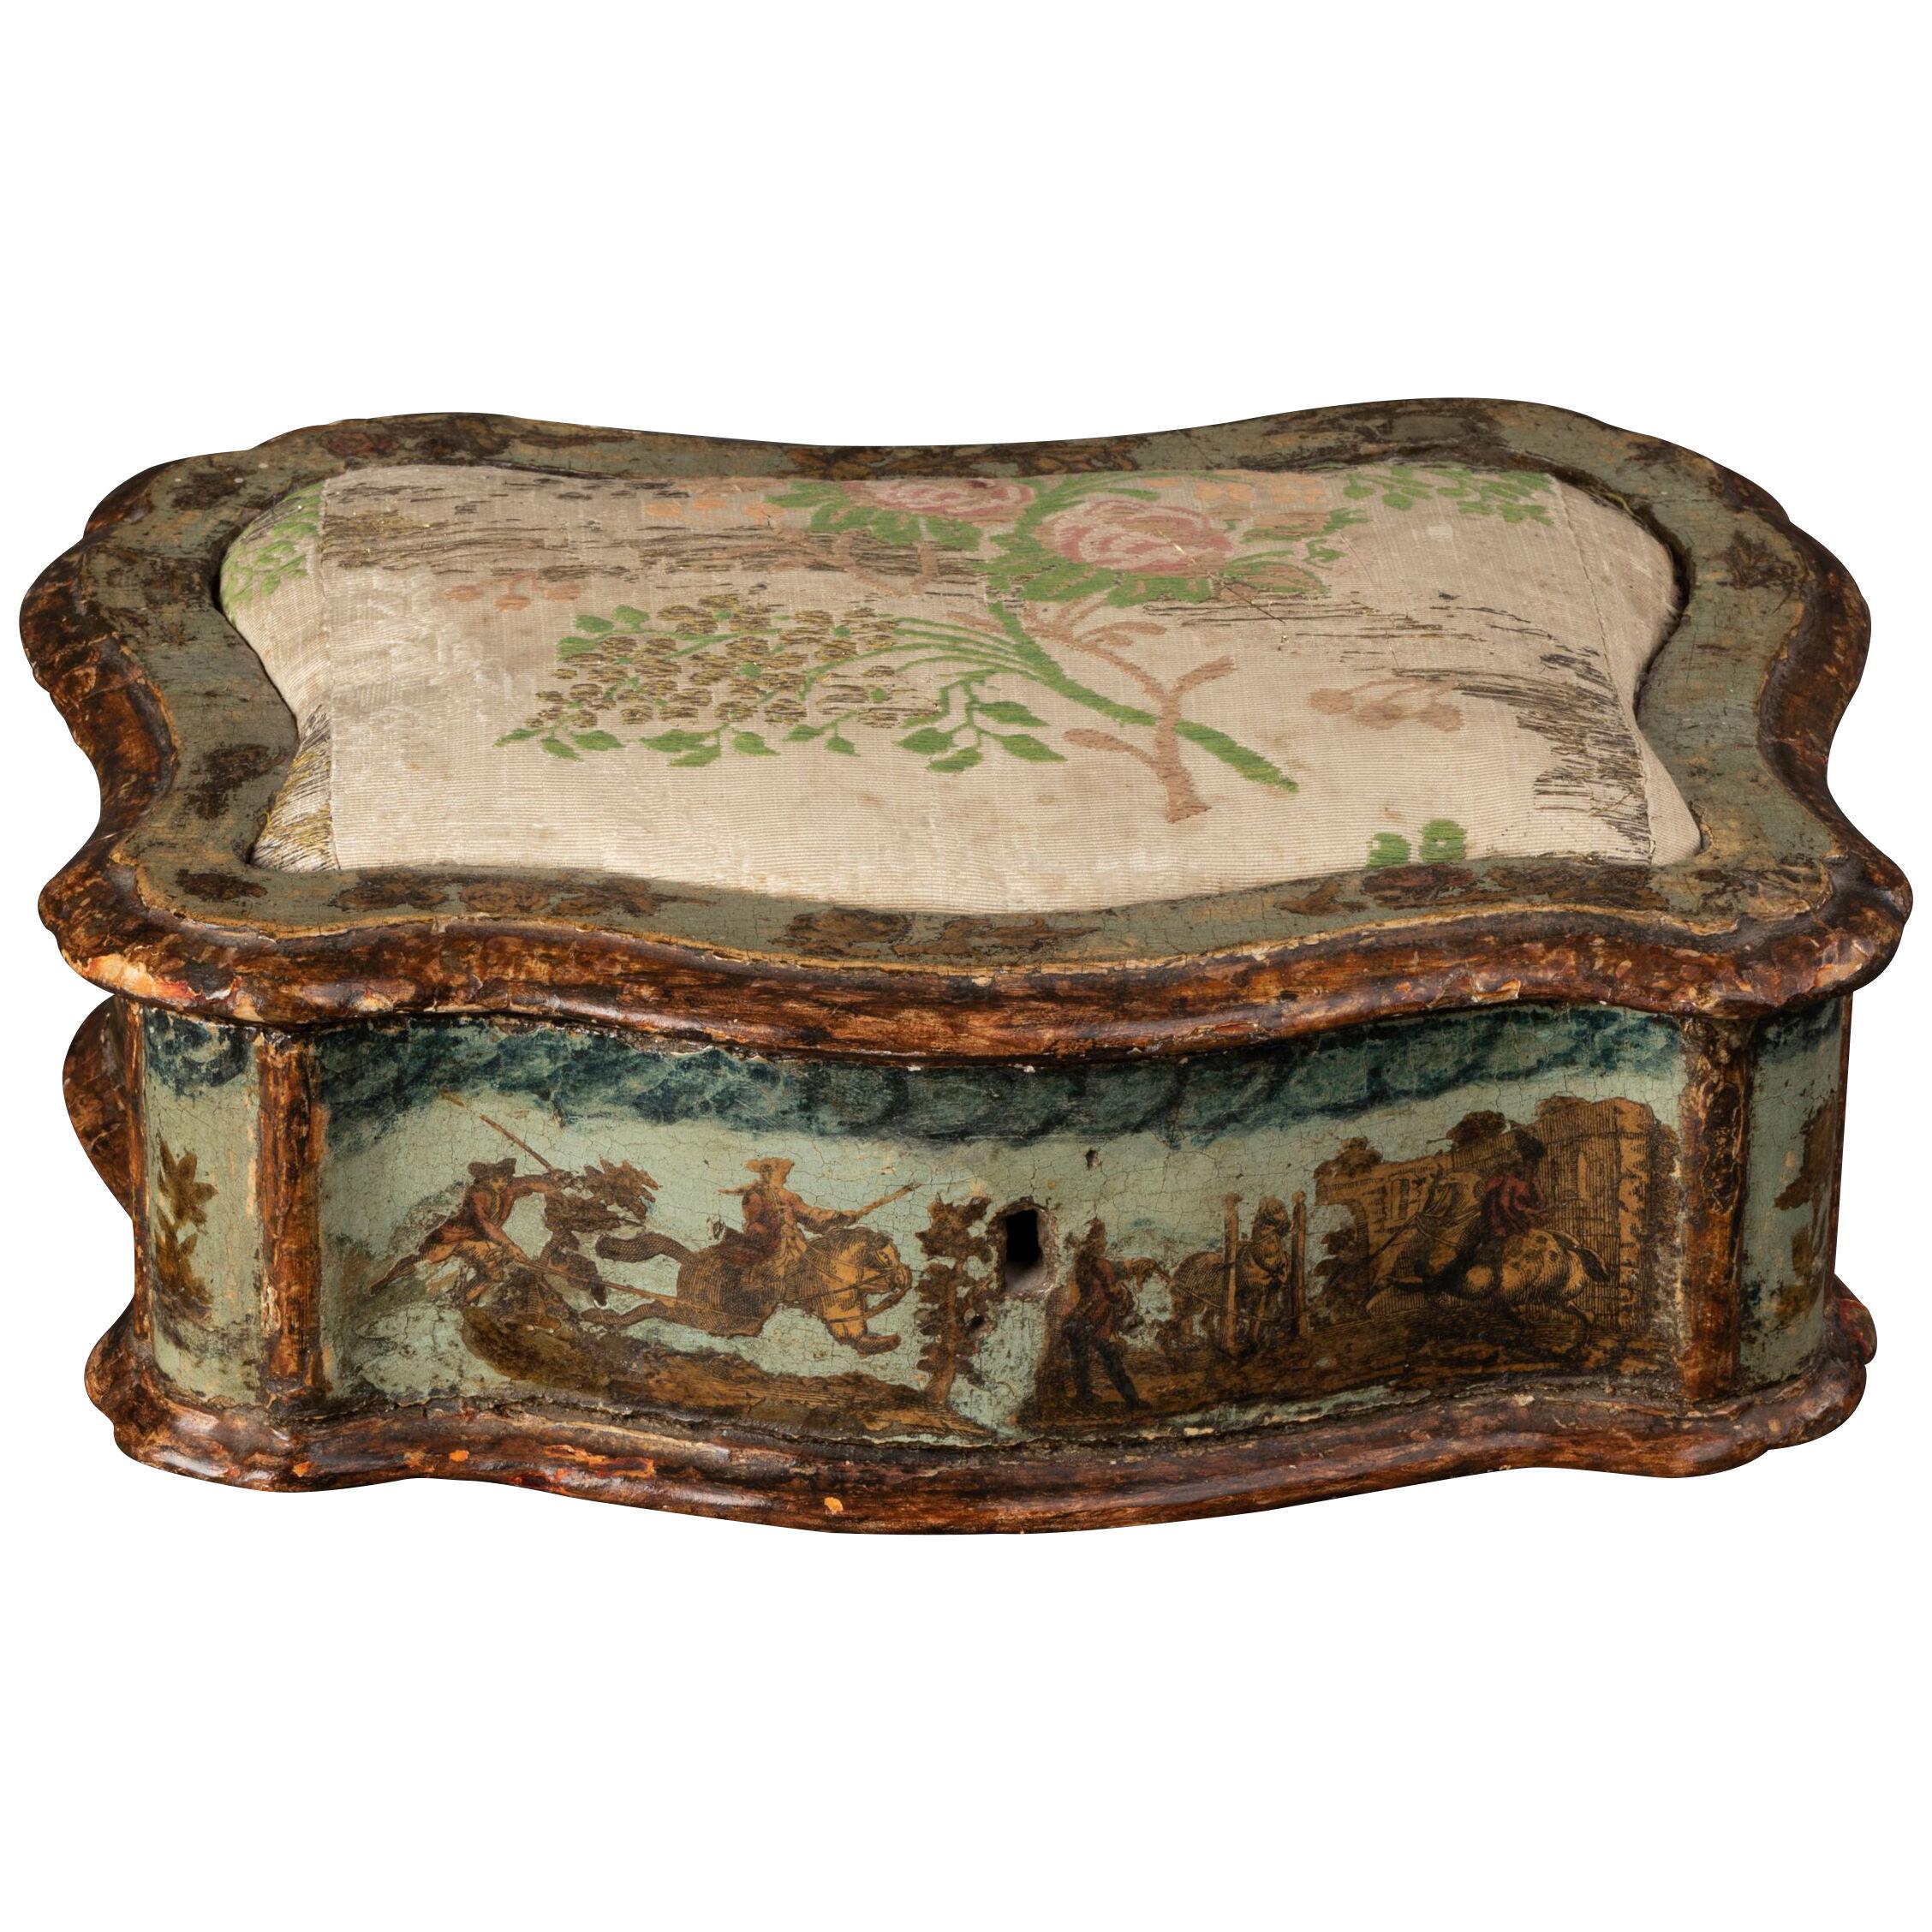 Sewing box made of wood and arte povera - Veneto - Early 18th century